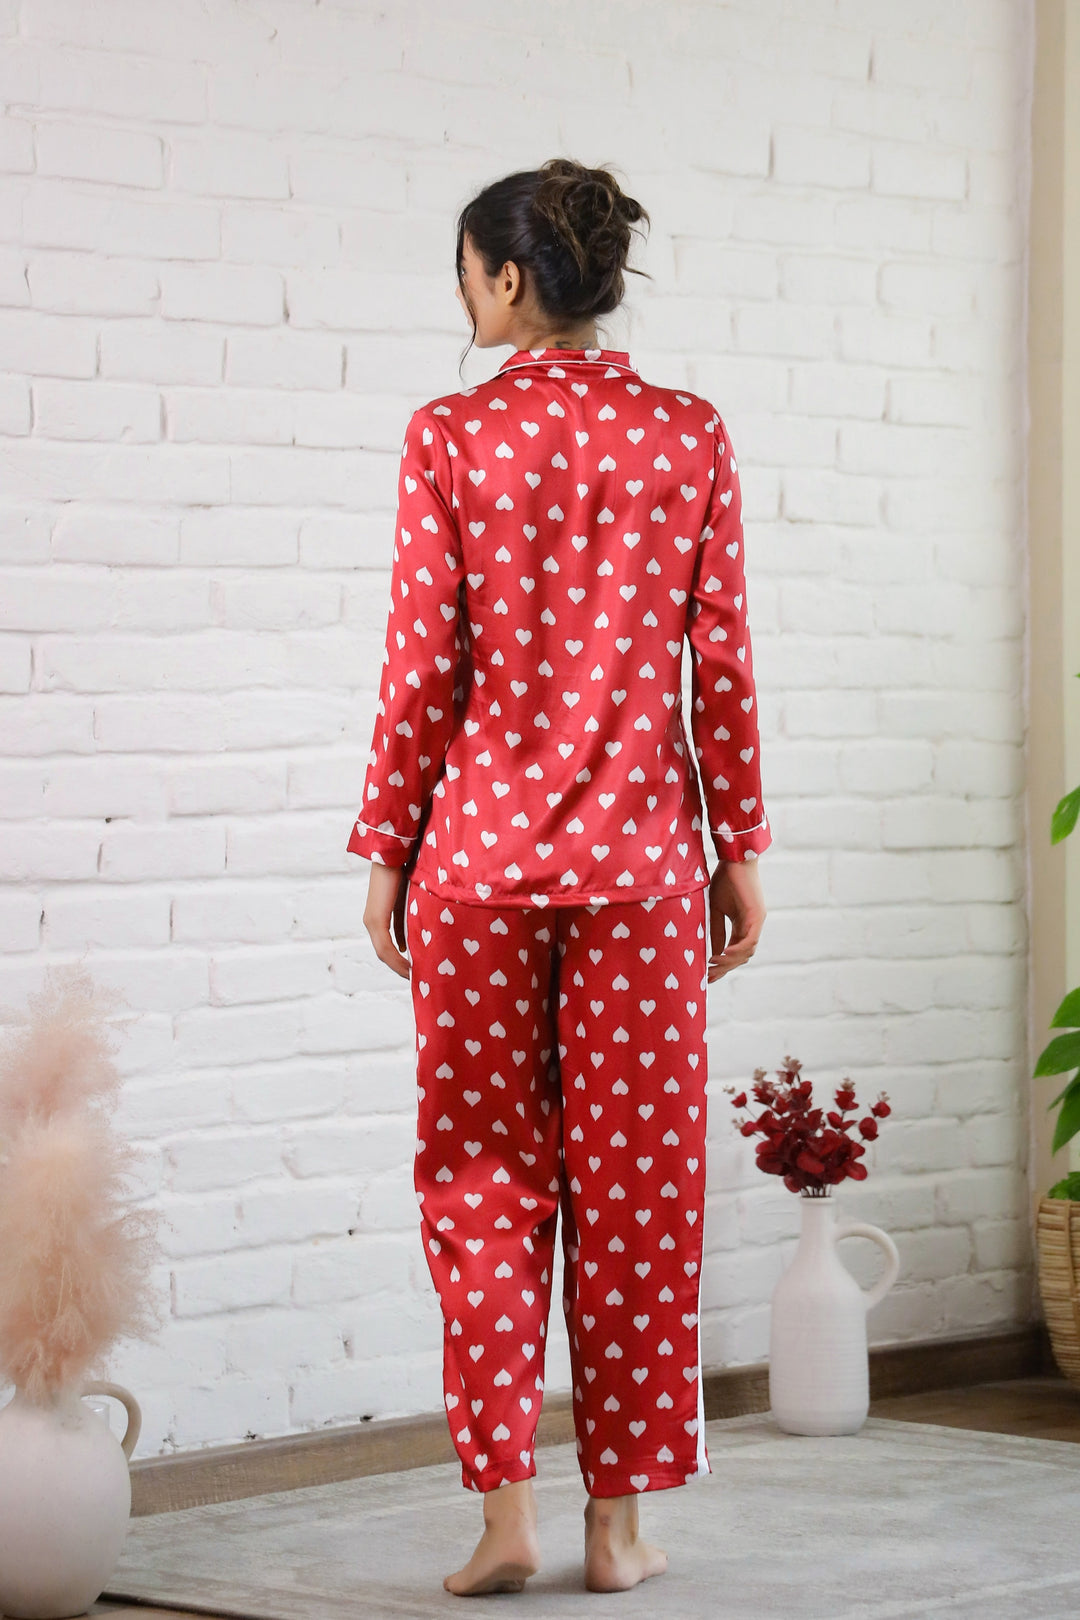 Red Heart Printed Satin Night Suit